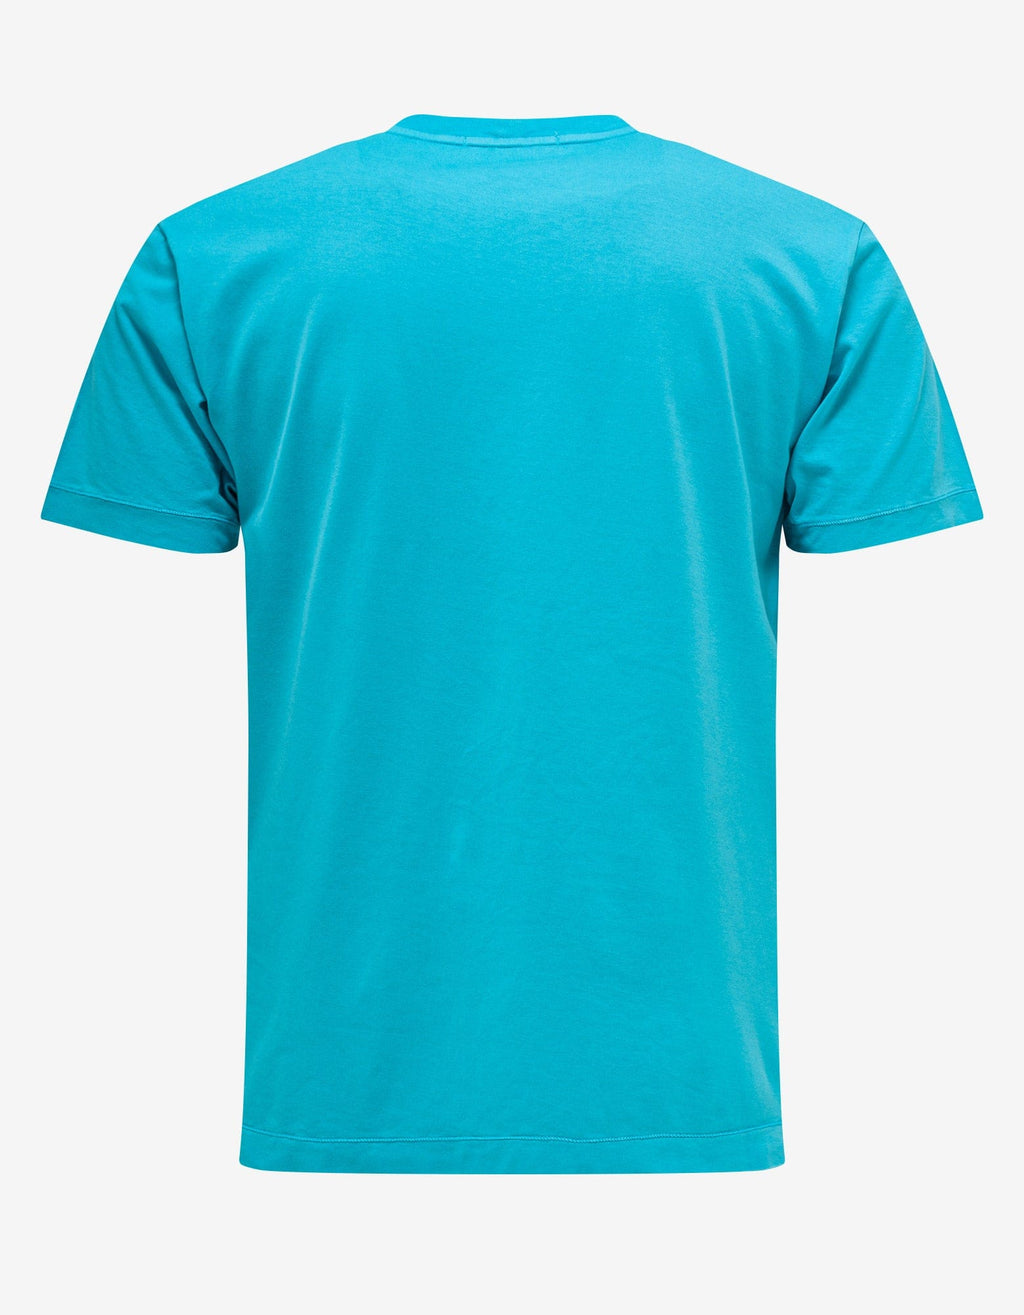 Stone Island Turquoise Blue Compass Patch T-Shirt